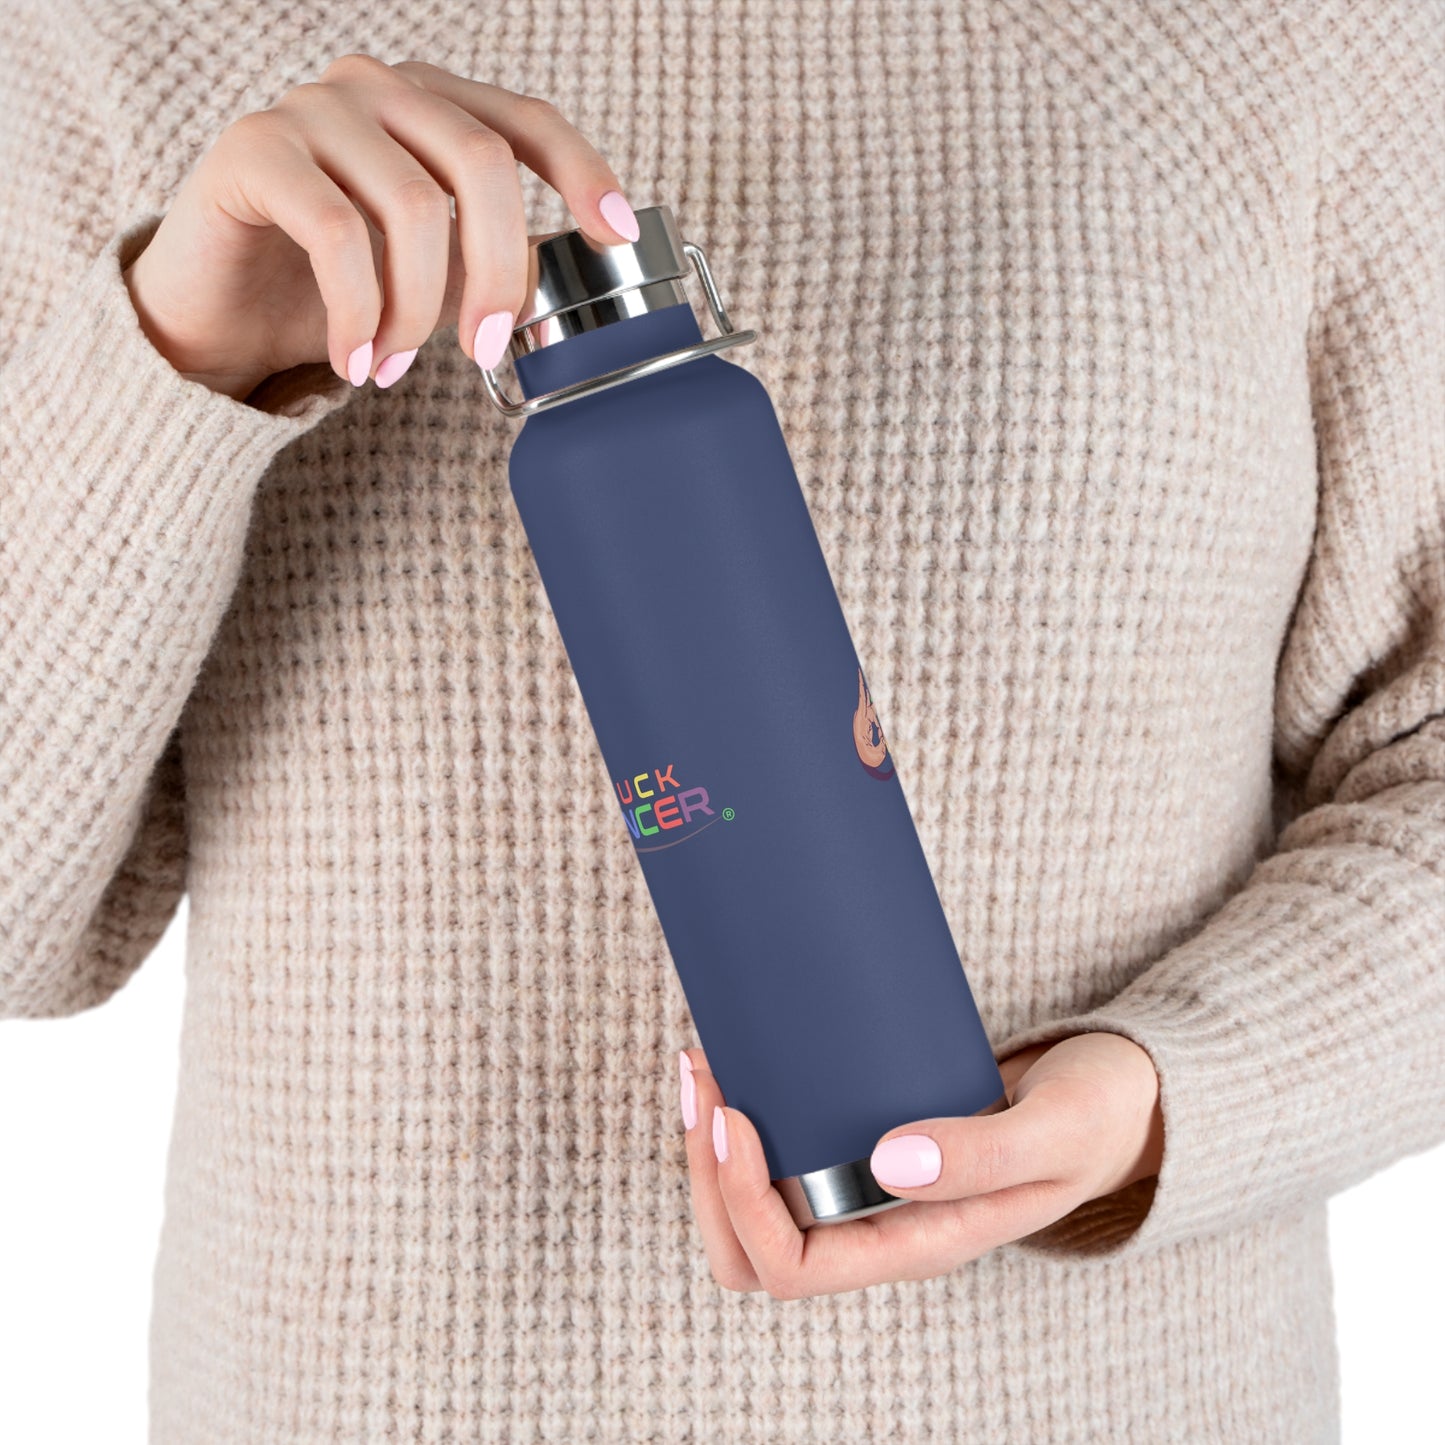 Copper Vacuum Insulated Bottle, 22oz-"PLUCK CANCER!"